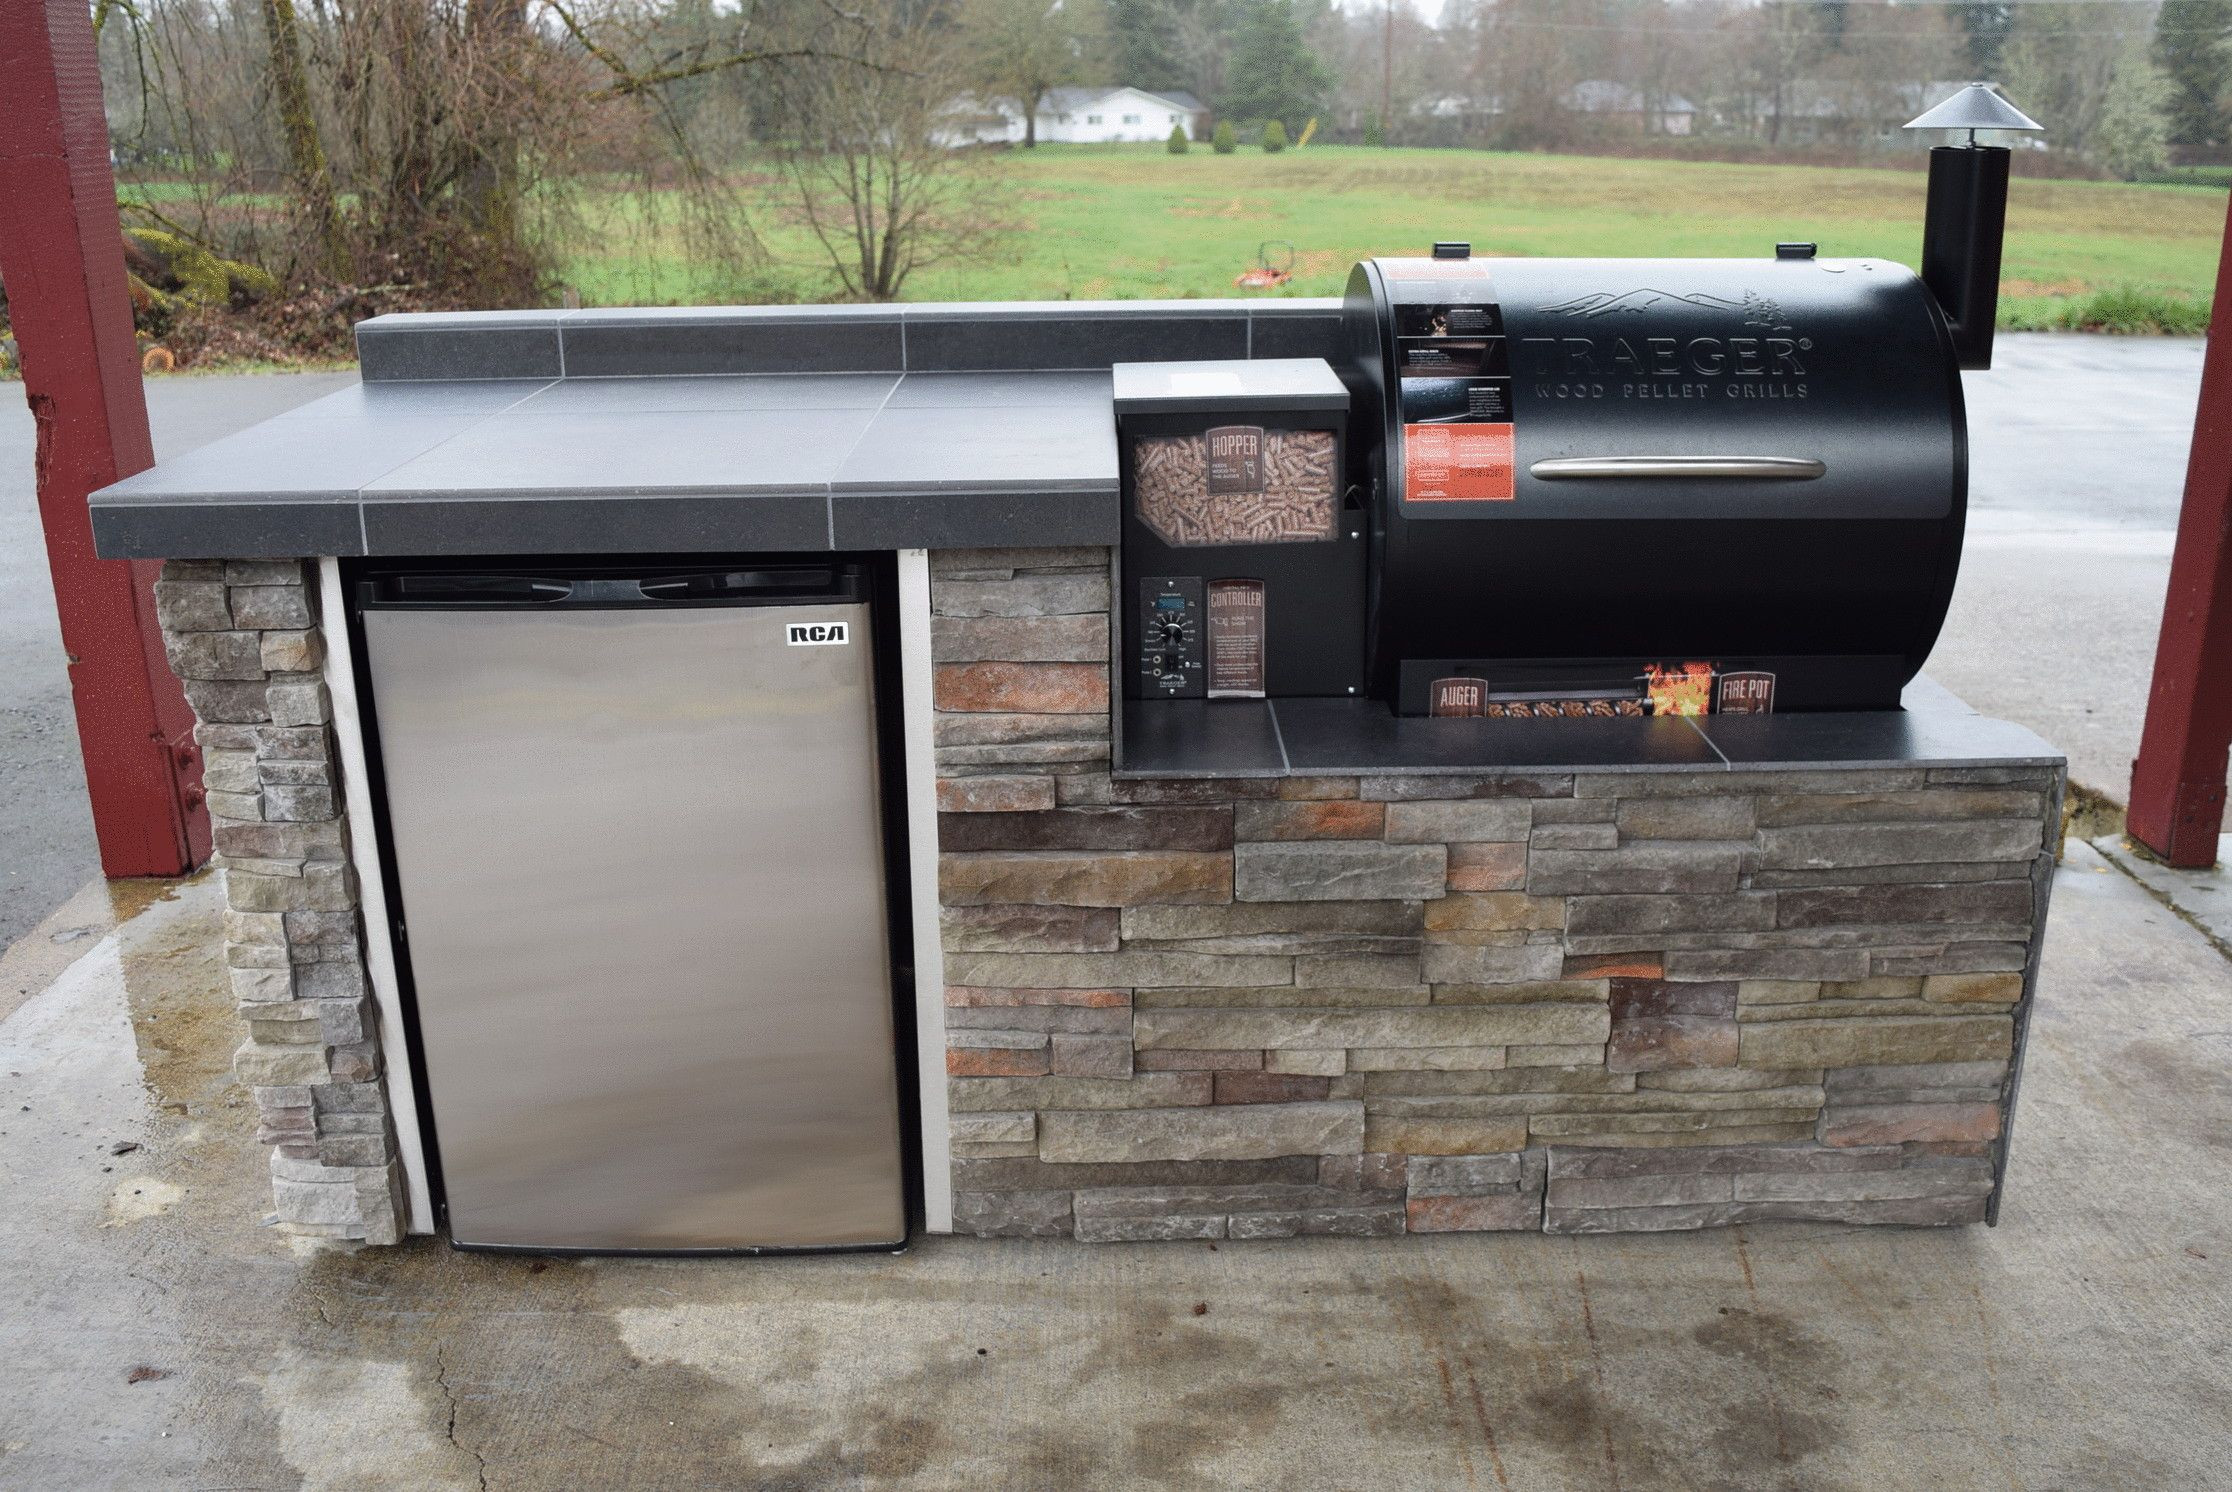 Traeger Built In Outdoor Kitchen
 Outdoor Kitchen for the Traeger pellet grill